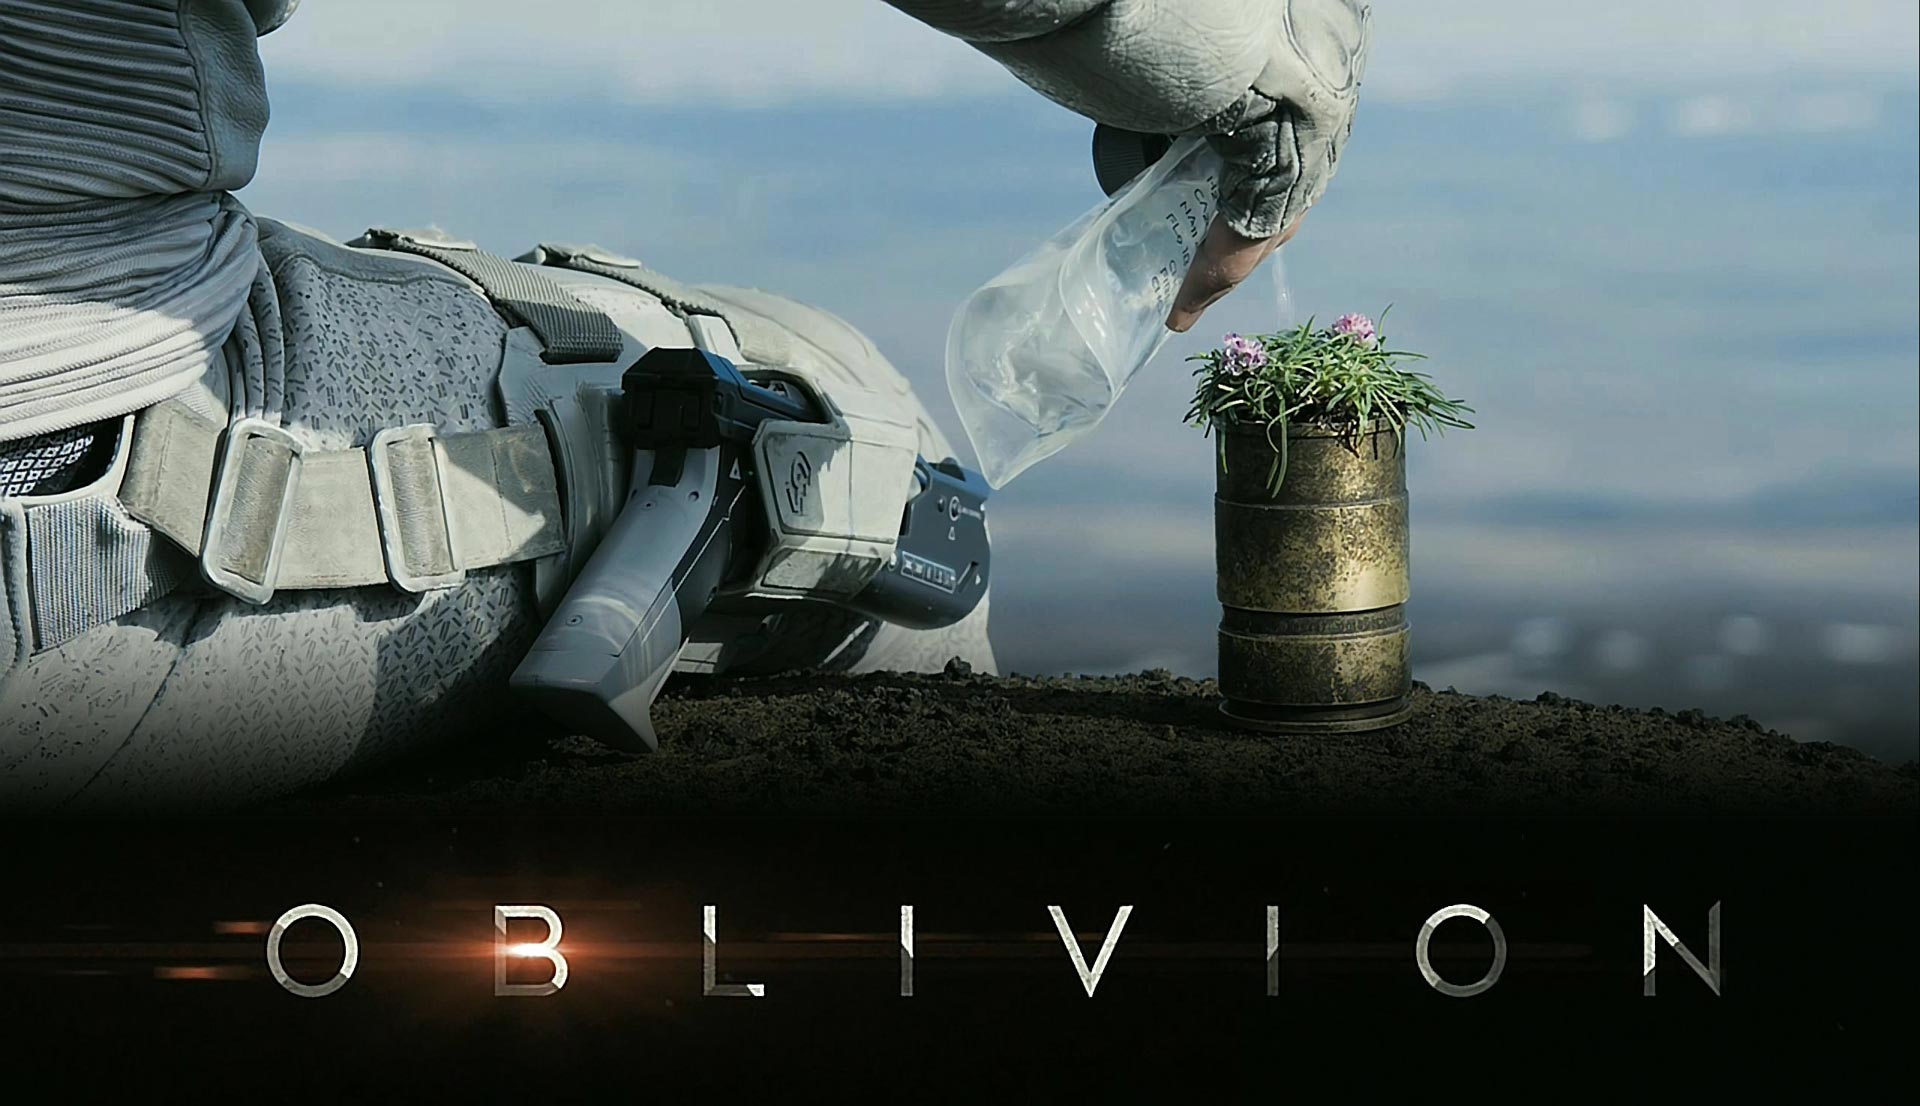 Movie Trailer: New Oblivion trailer looks awesome